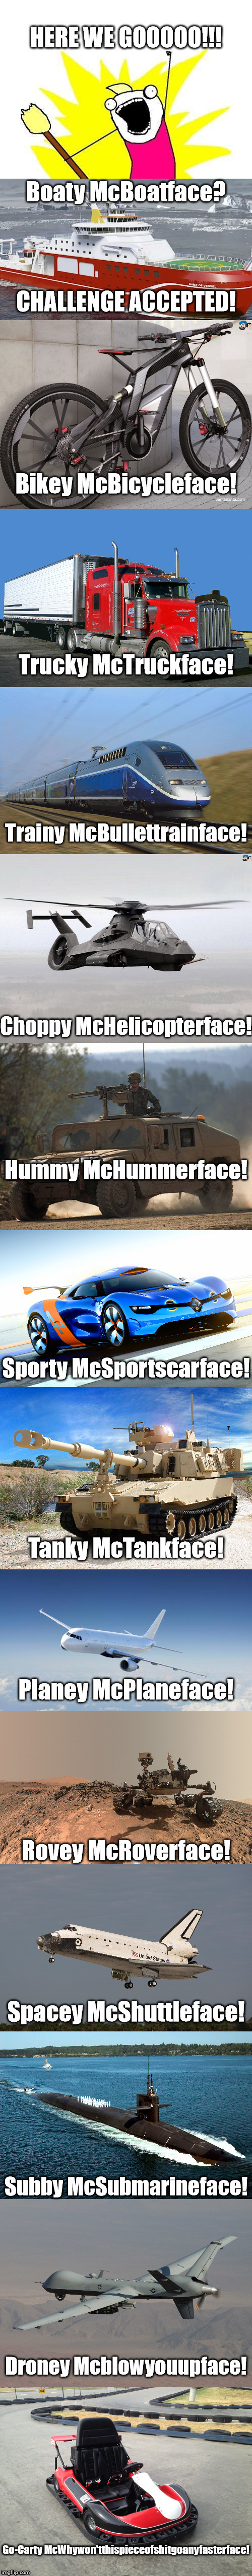 All the Vehicley McVehiclefaces! | _ | image tagged in boaty mcboatface,x all the y | made w/ Imgflip meme maker